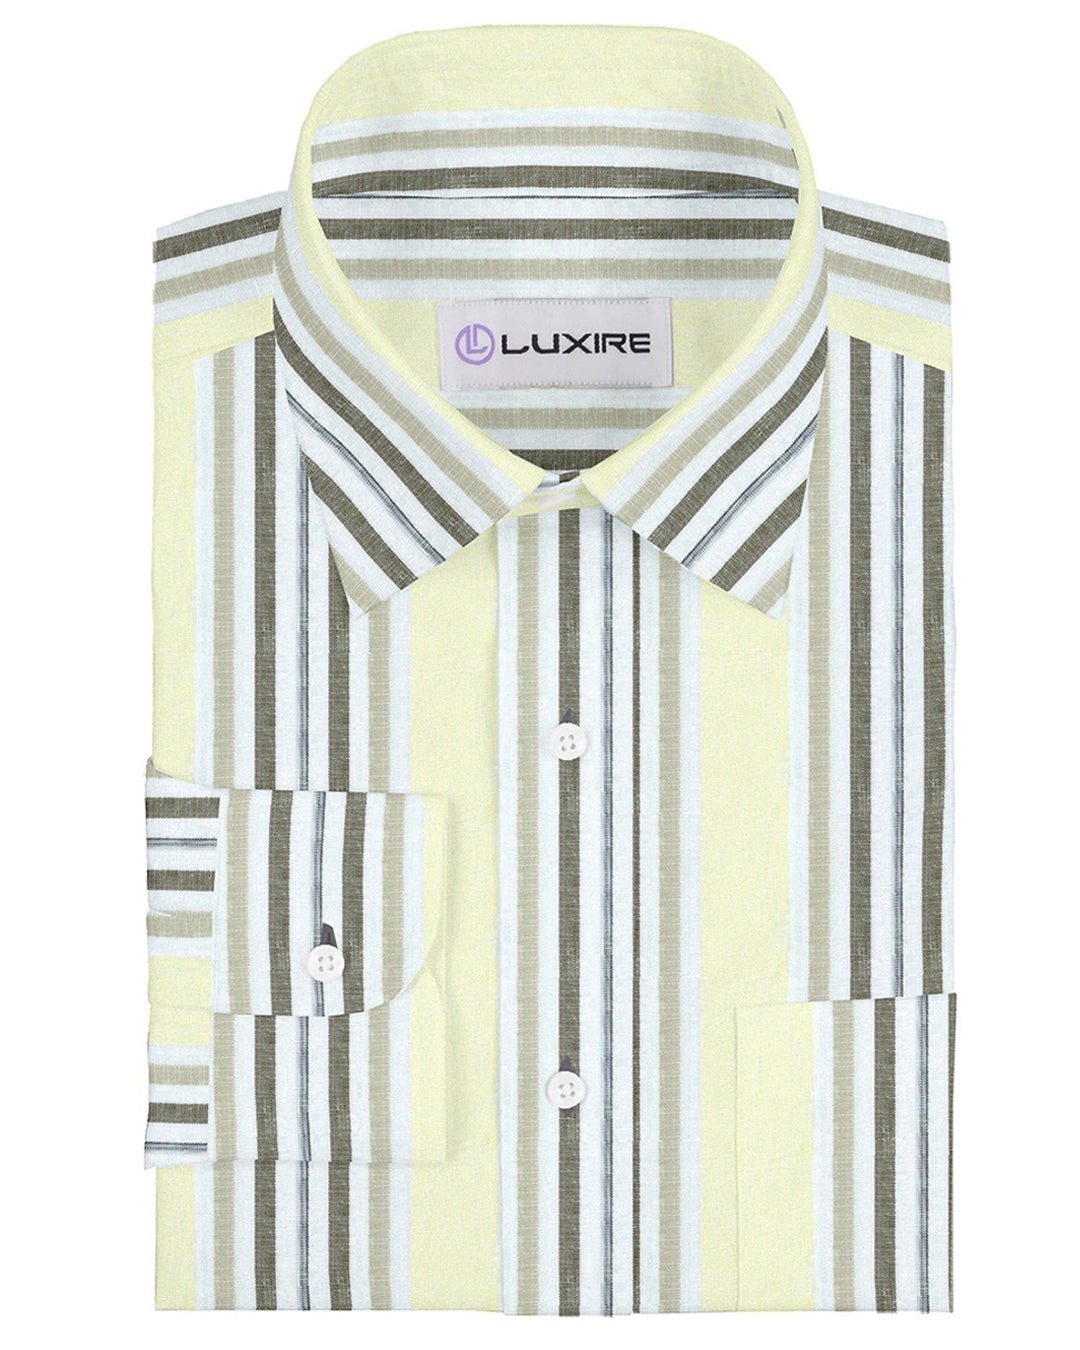 Front view of custom linen shirt for men by Luxire in pale yellow and brown